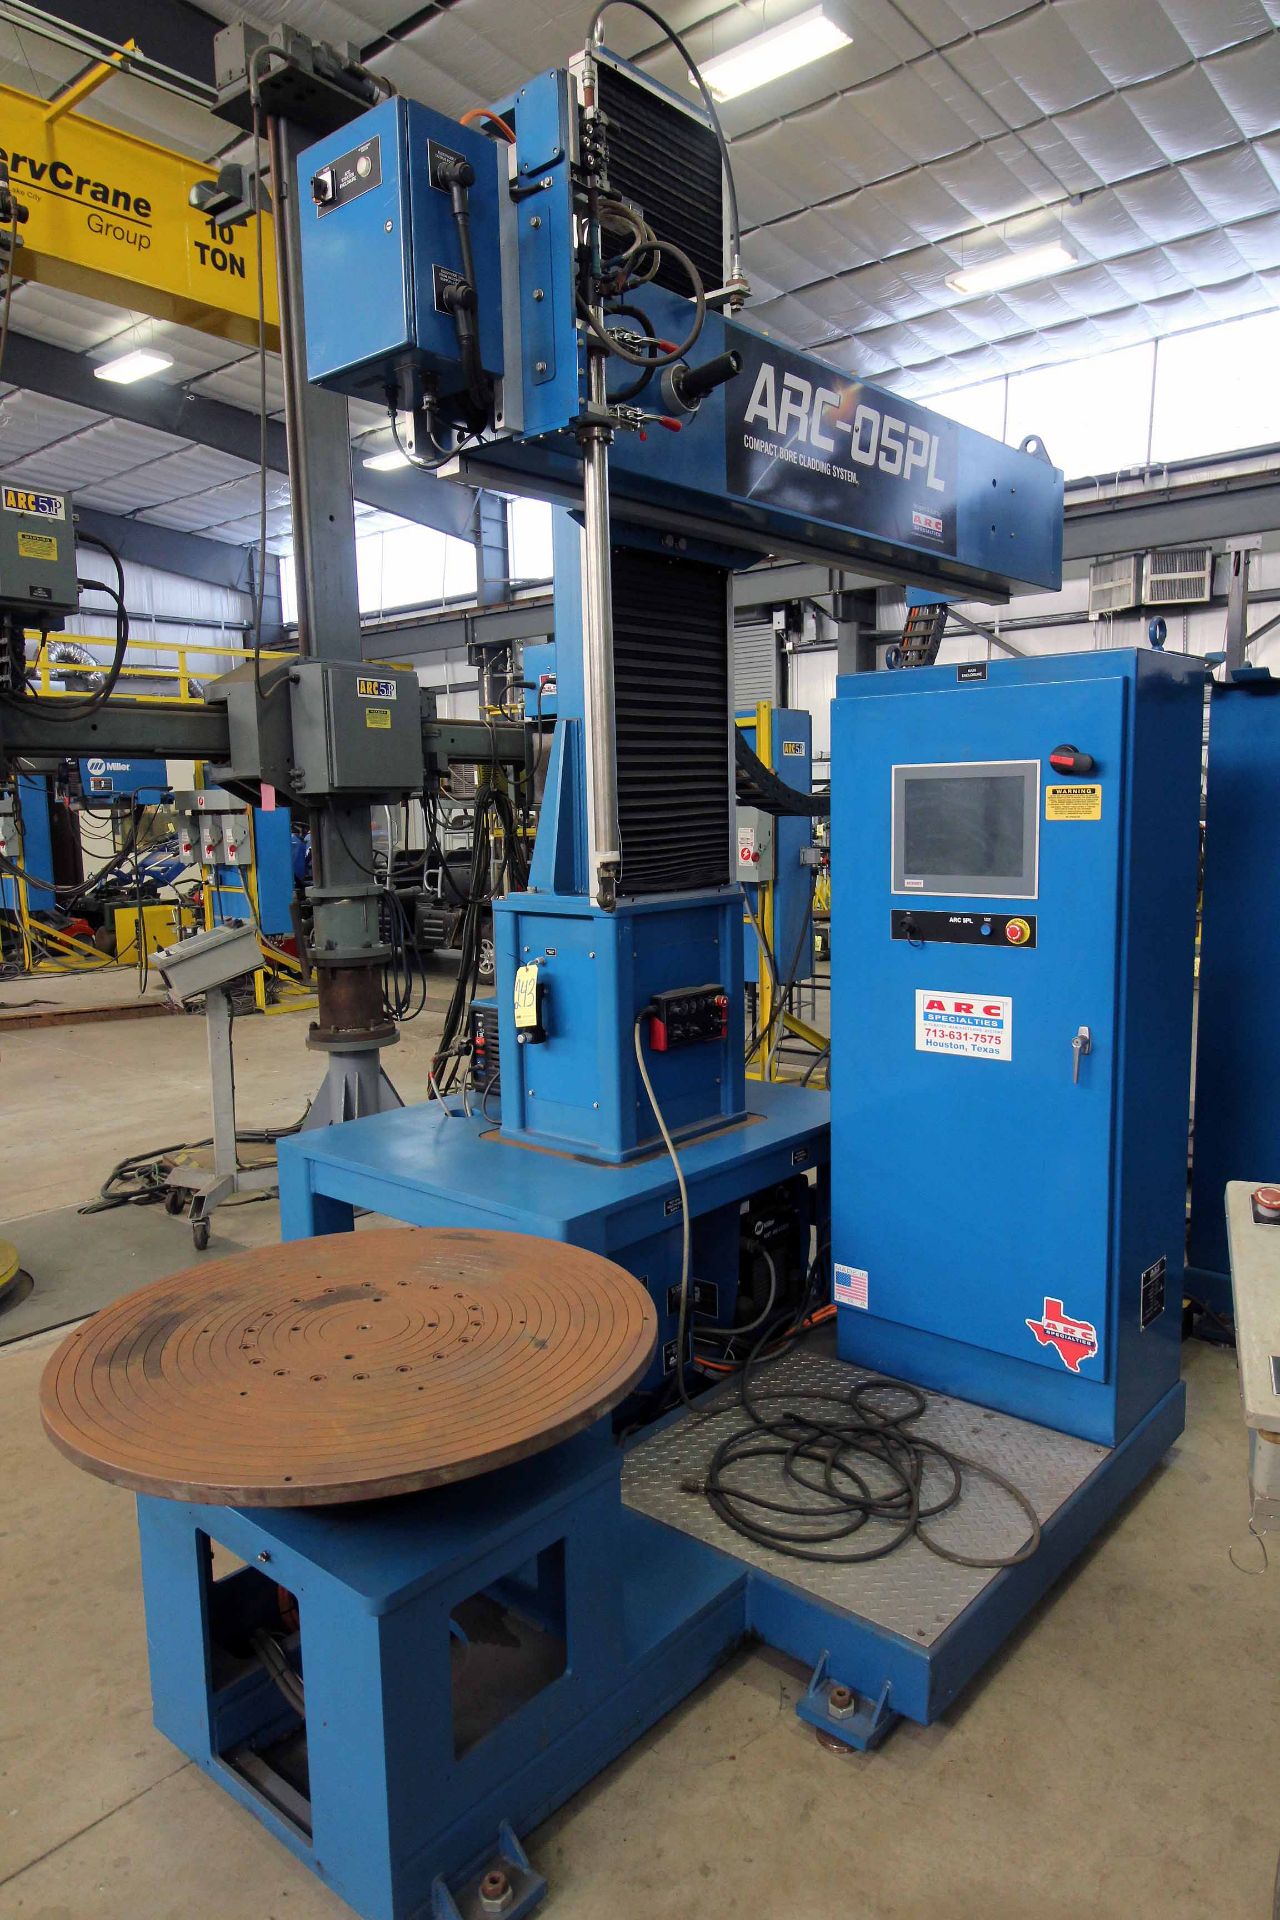 BORE CLADDING SYSTEM, ARC SPECIALTIES MDL. ARC-05PL, new 2014, 5,000 amps, Miller Mdl. XMT450 CC/